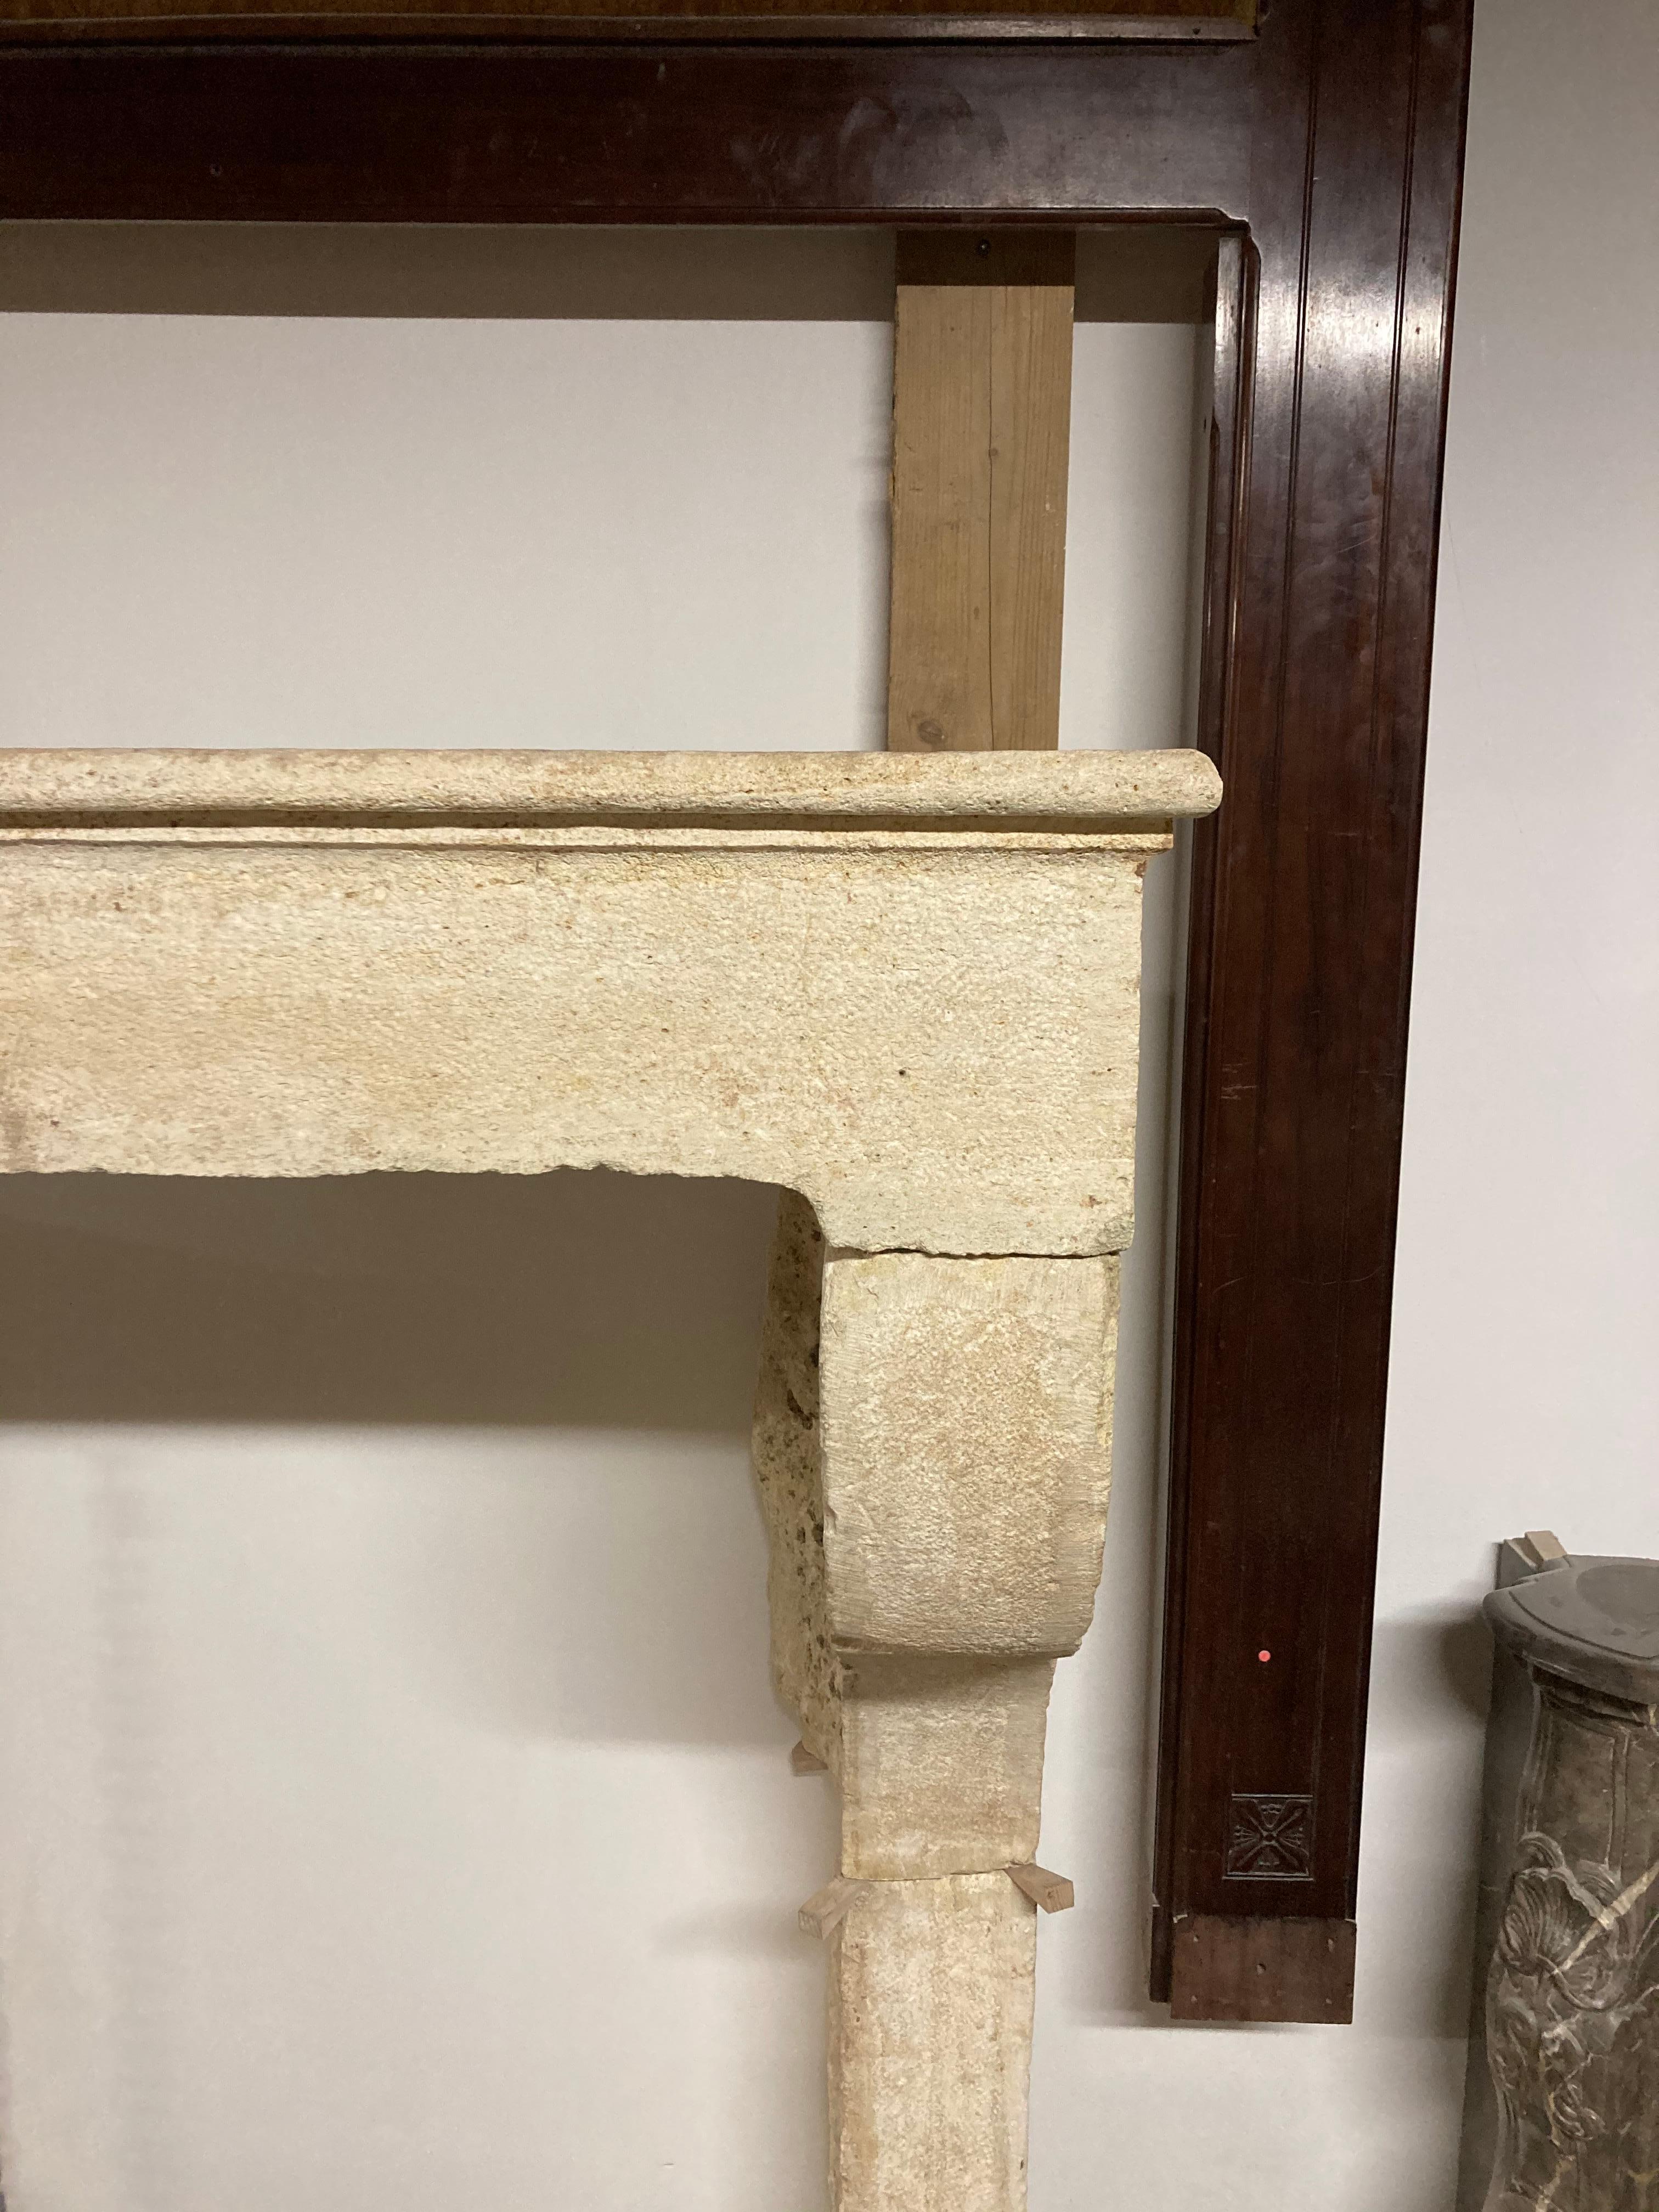 Happy to offer this wonderful large French fireplace mantel in Burgundy limestone.
It’s grand proportions make is very suitable for an outdoor fireplace or large living areas. It simple lines and style make it very accessible and great to use in any